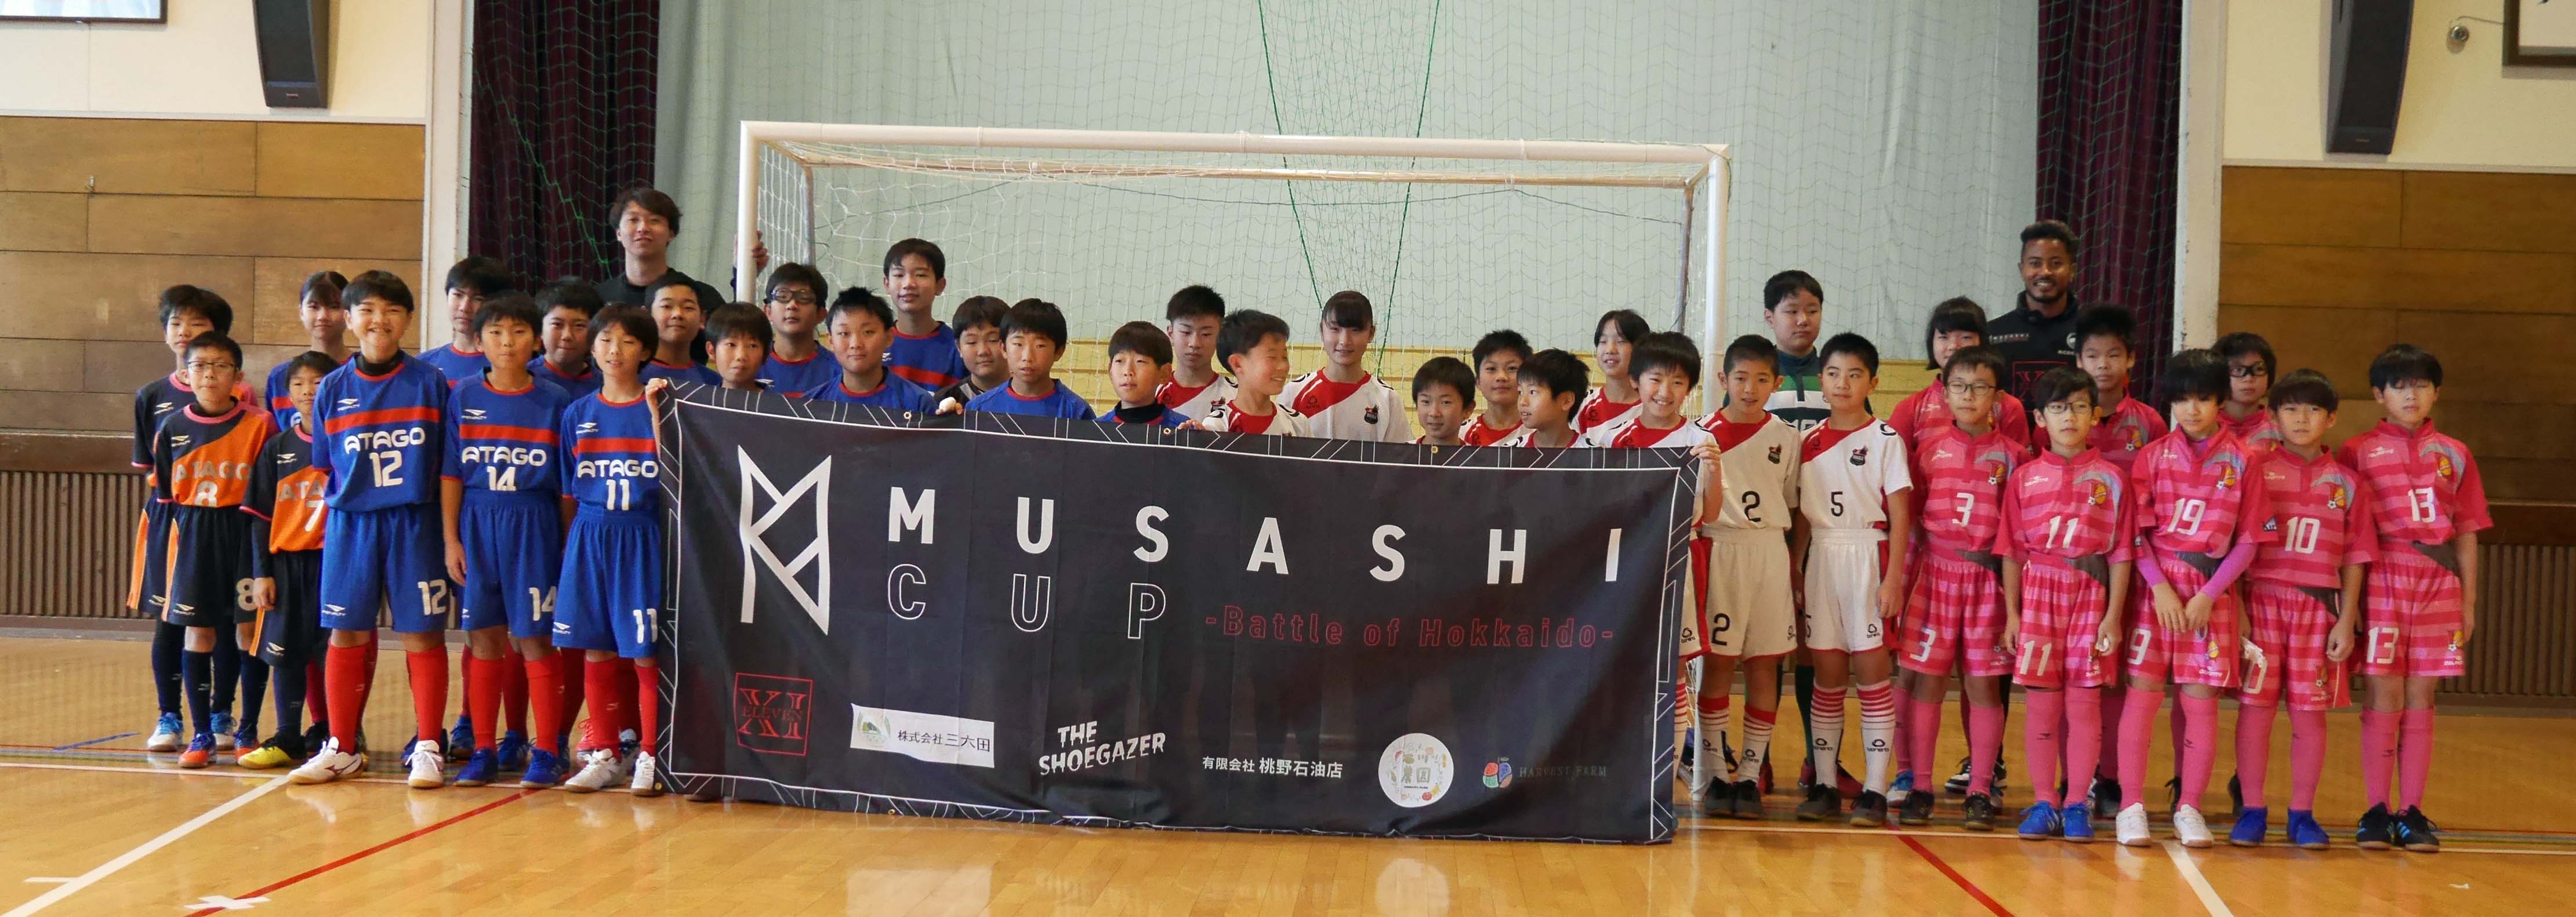 20221126_MUSASHICUP10-01